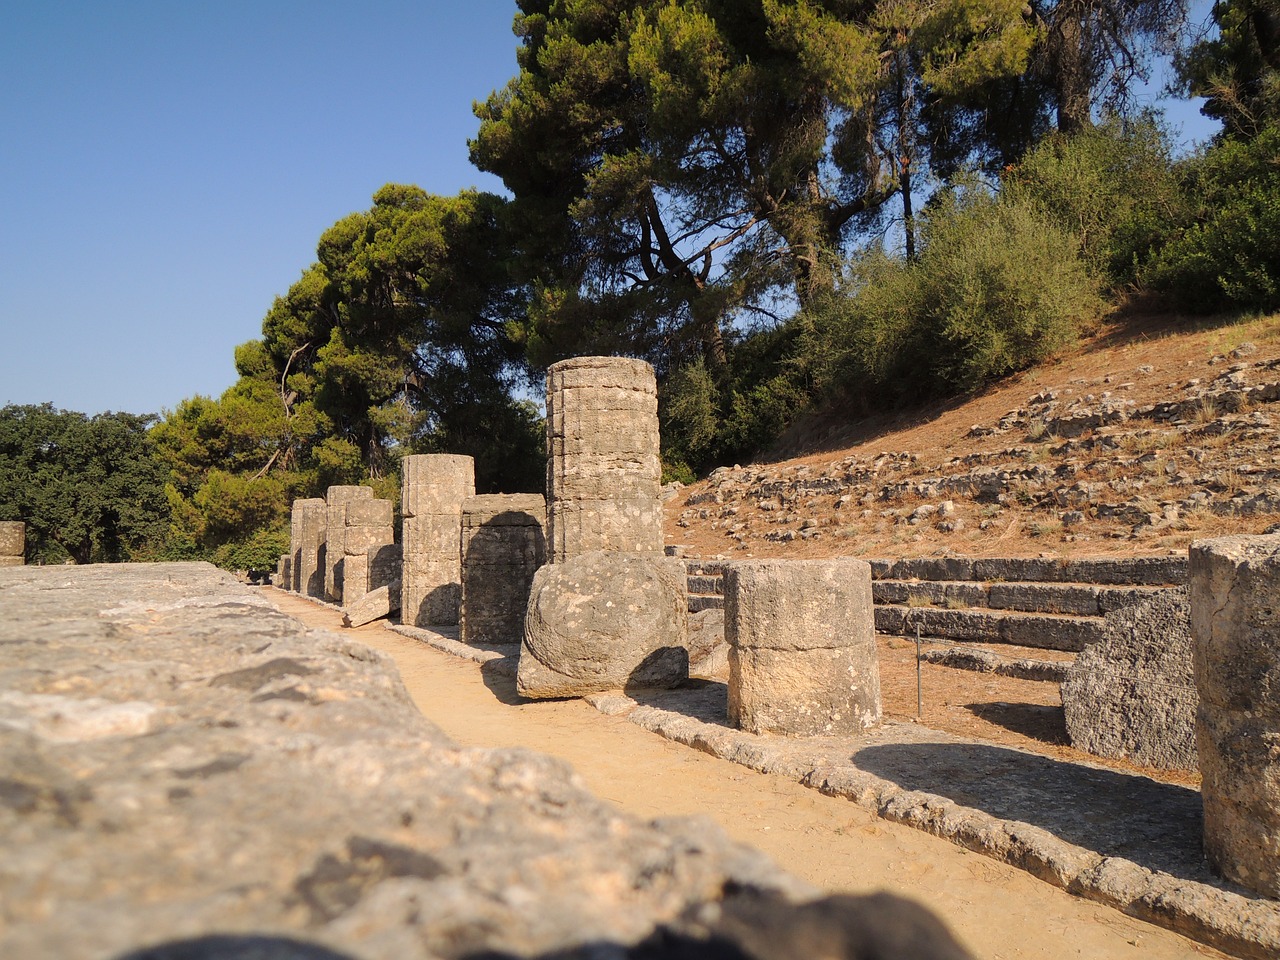 a group of stone pillars sitting next to each other, a picture, flickr, realism, an ancient greek trireme, ancient ruins in the forest, camera photo, olympus platform